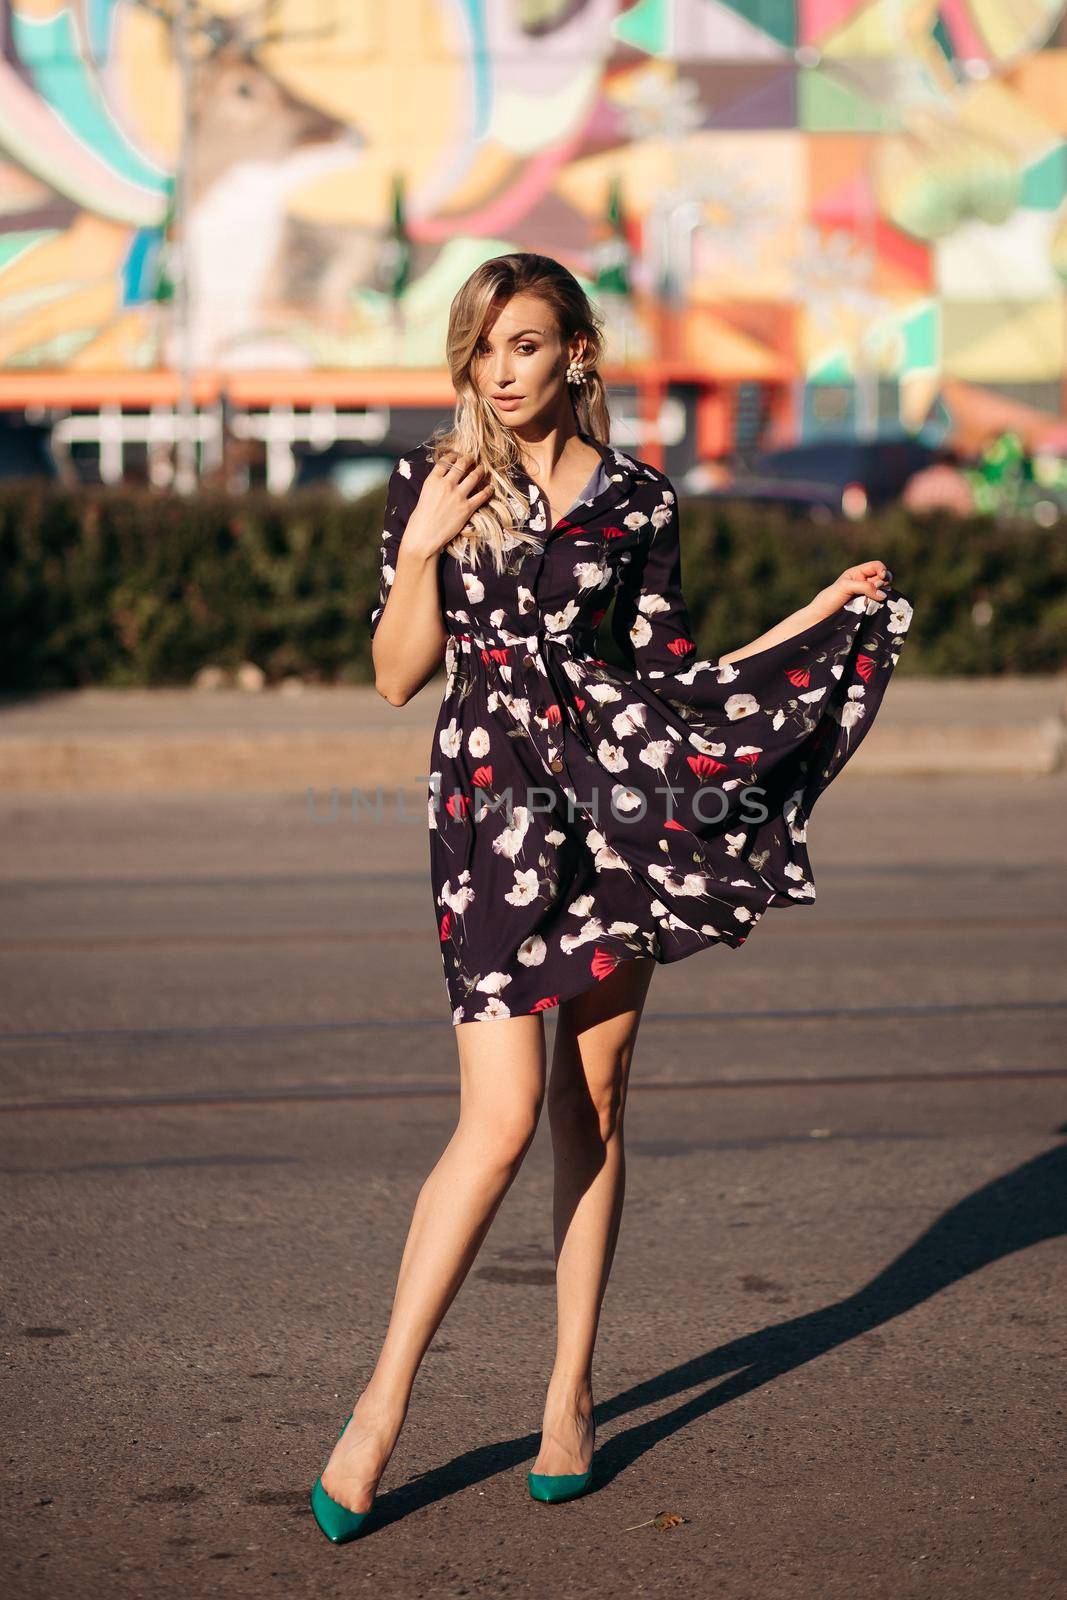 Full length portrait of stunning blonde woman in colored black, white and red dress and green heels posing with skirt in hand and eyes closed in bright sunshine in the street. Colored background.